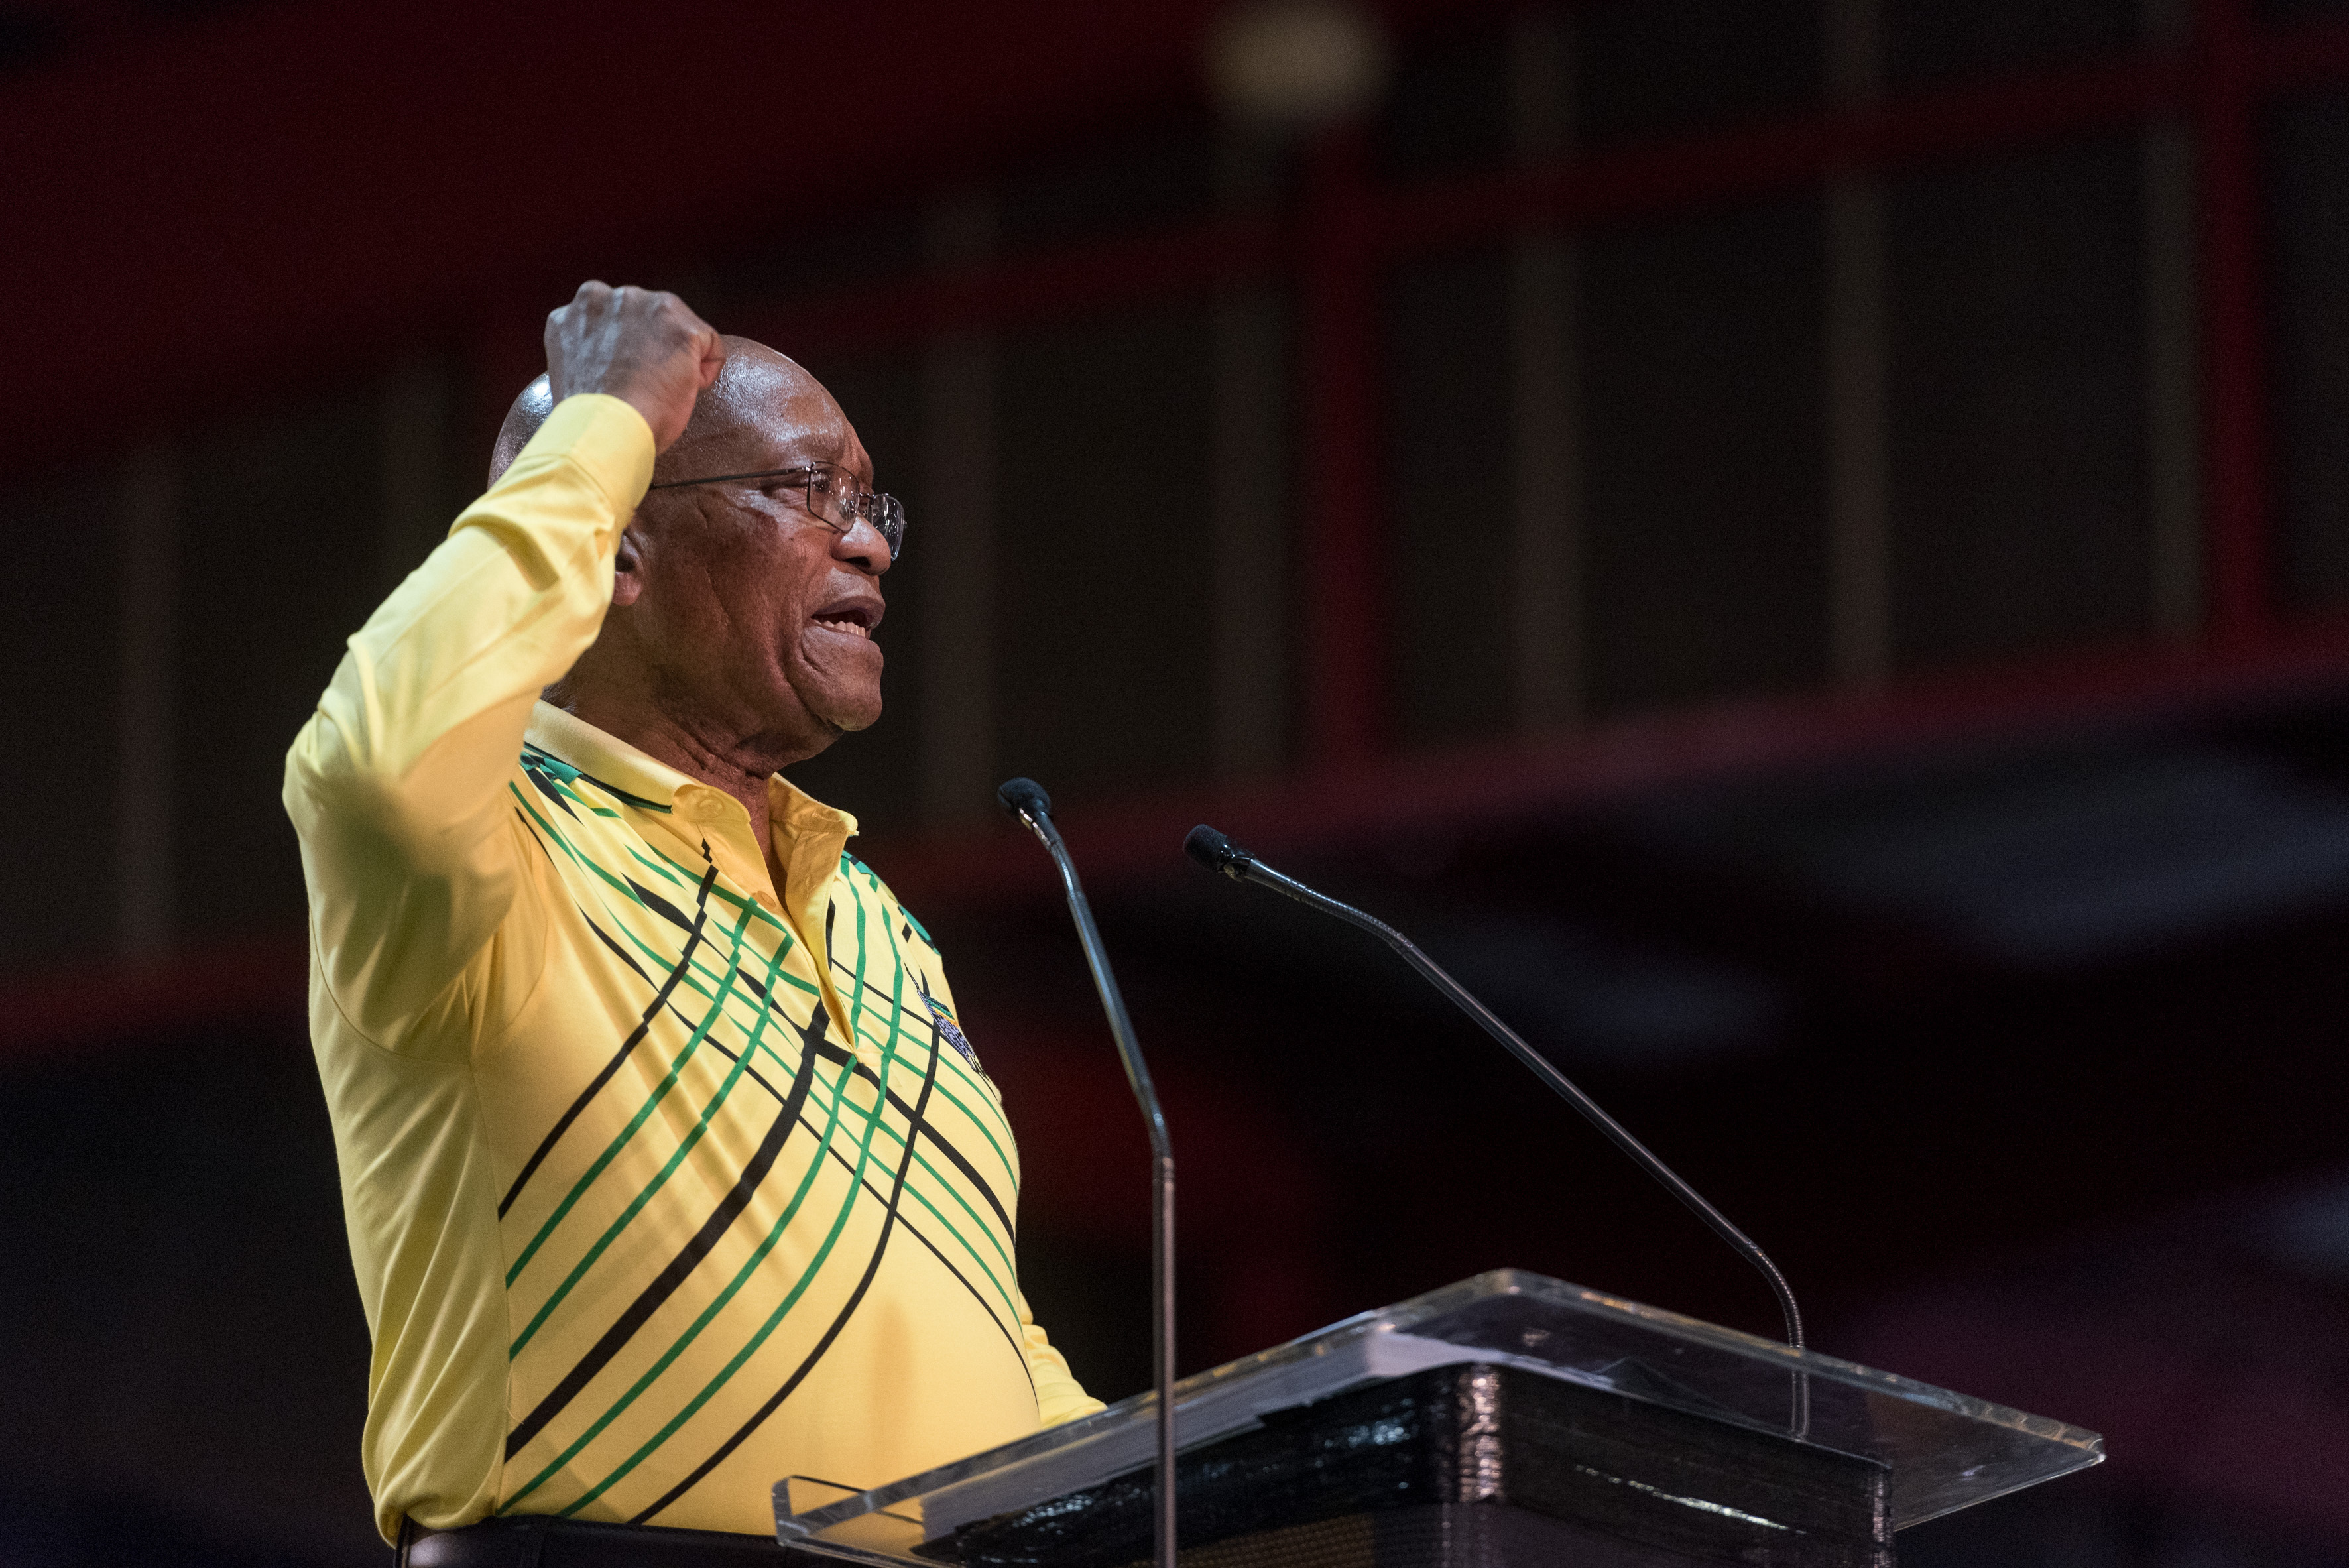 South African bishops: Zuma's resignation long overdue